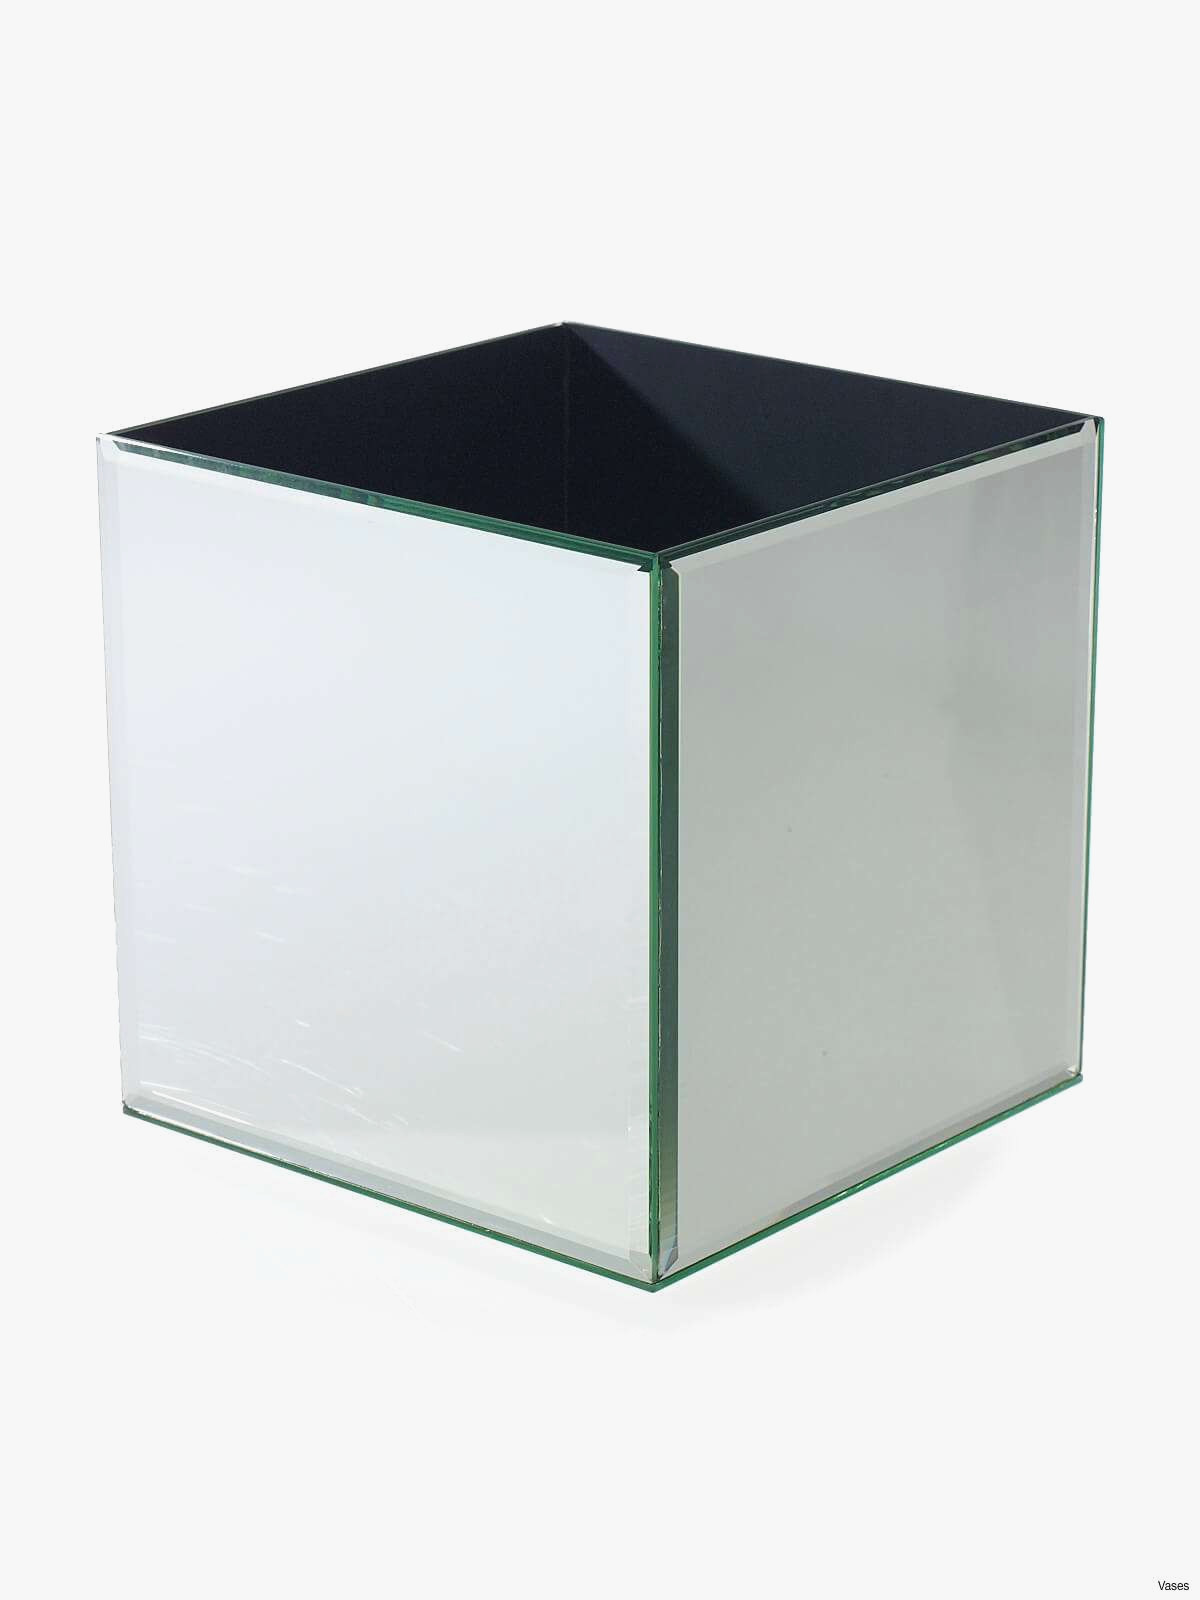 27 Popular Retro Vases for Sale 2024 free download retro vases for sale of 12 lovely glass centerpieces for tables collection 7p7u table gallery within glass centerpieces for tables elegant mirrored square vase 3h vases mirror weddings table